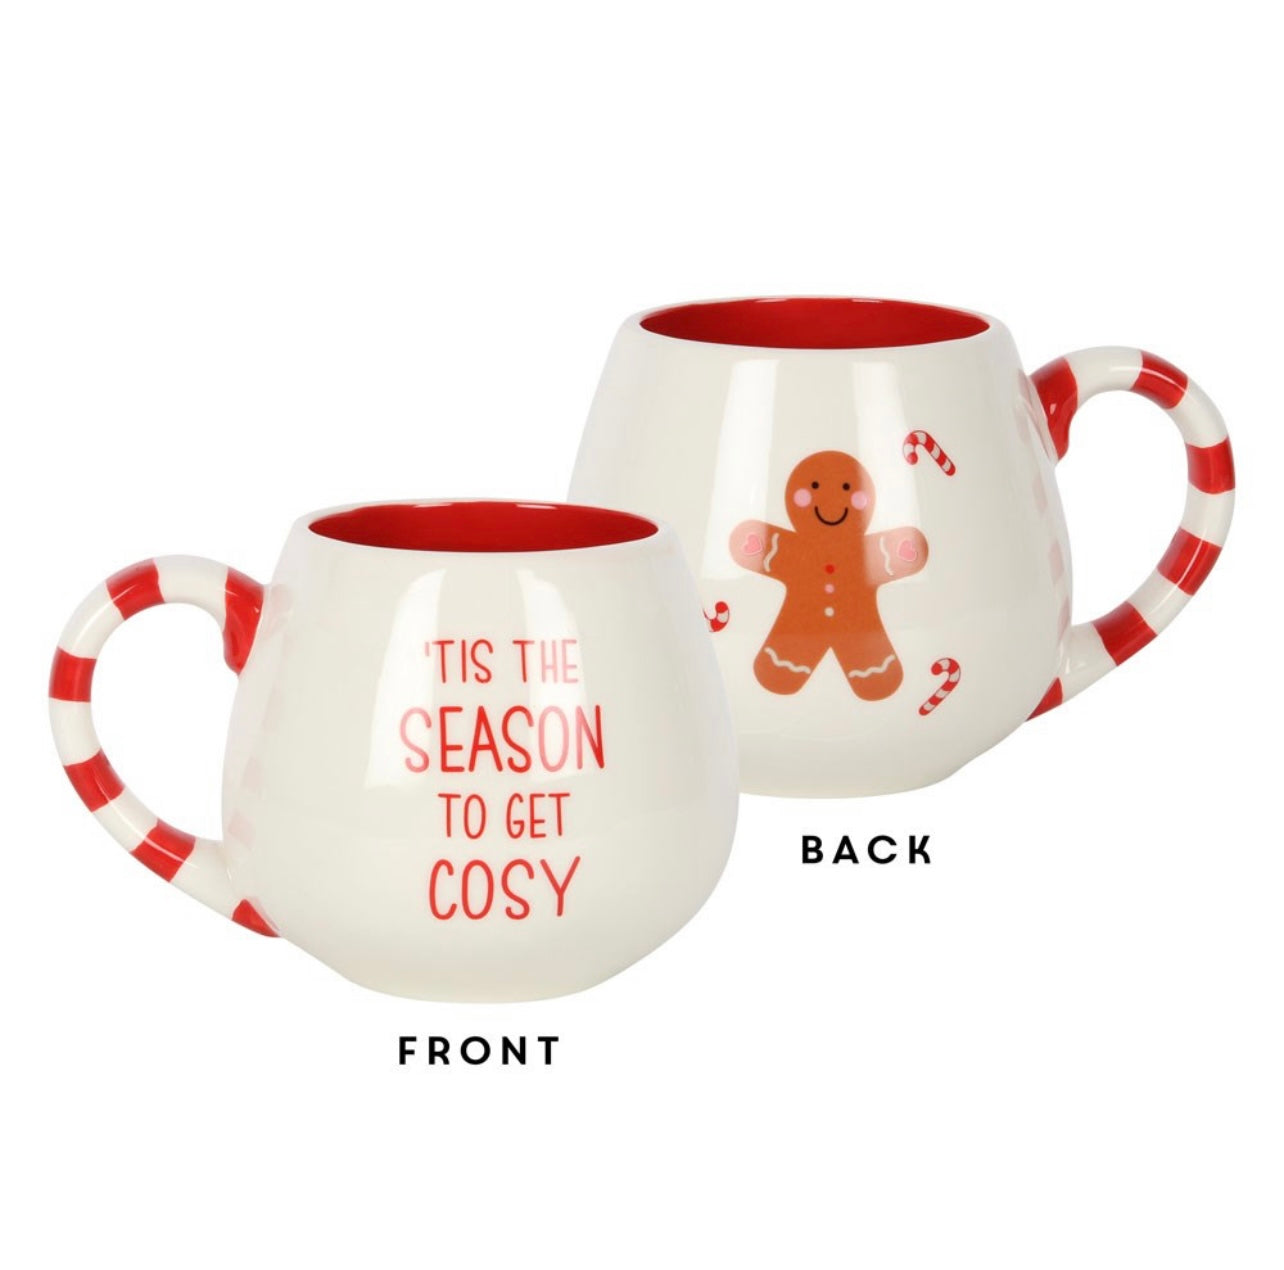 Aldi's Gingerbread Men Shaped Mug Toppers Are Back For The Holidays